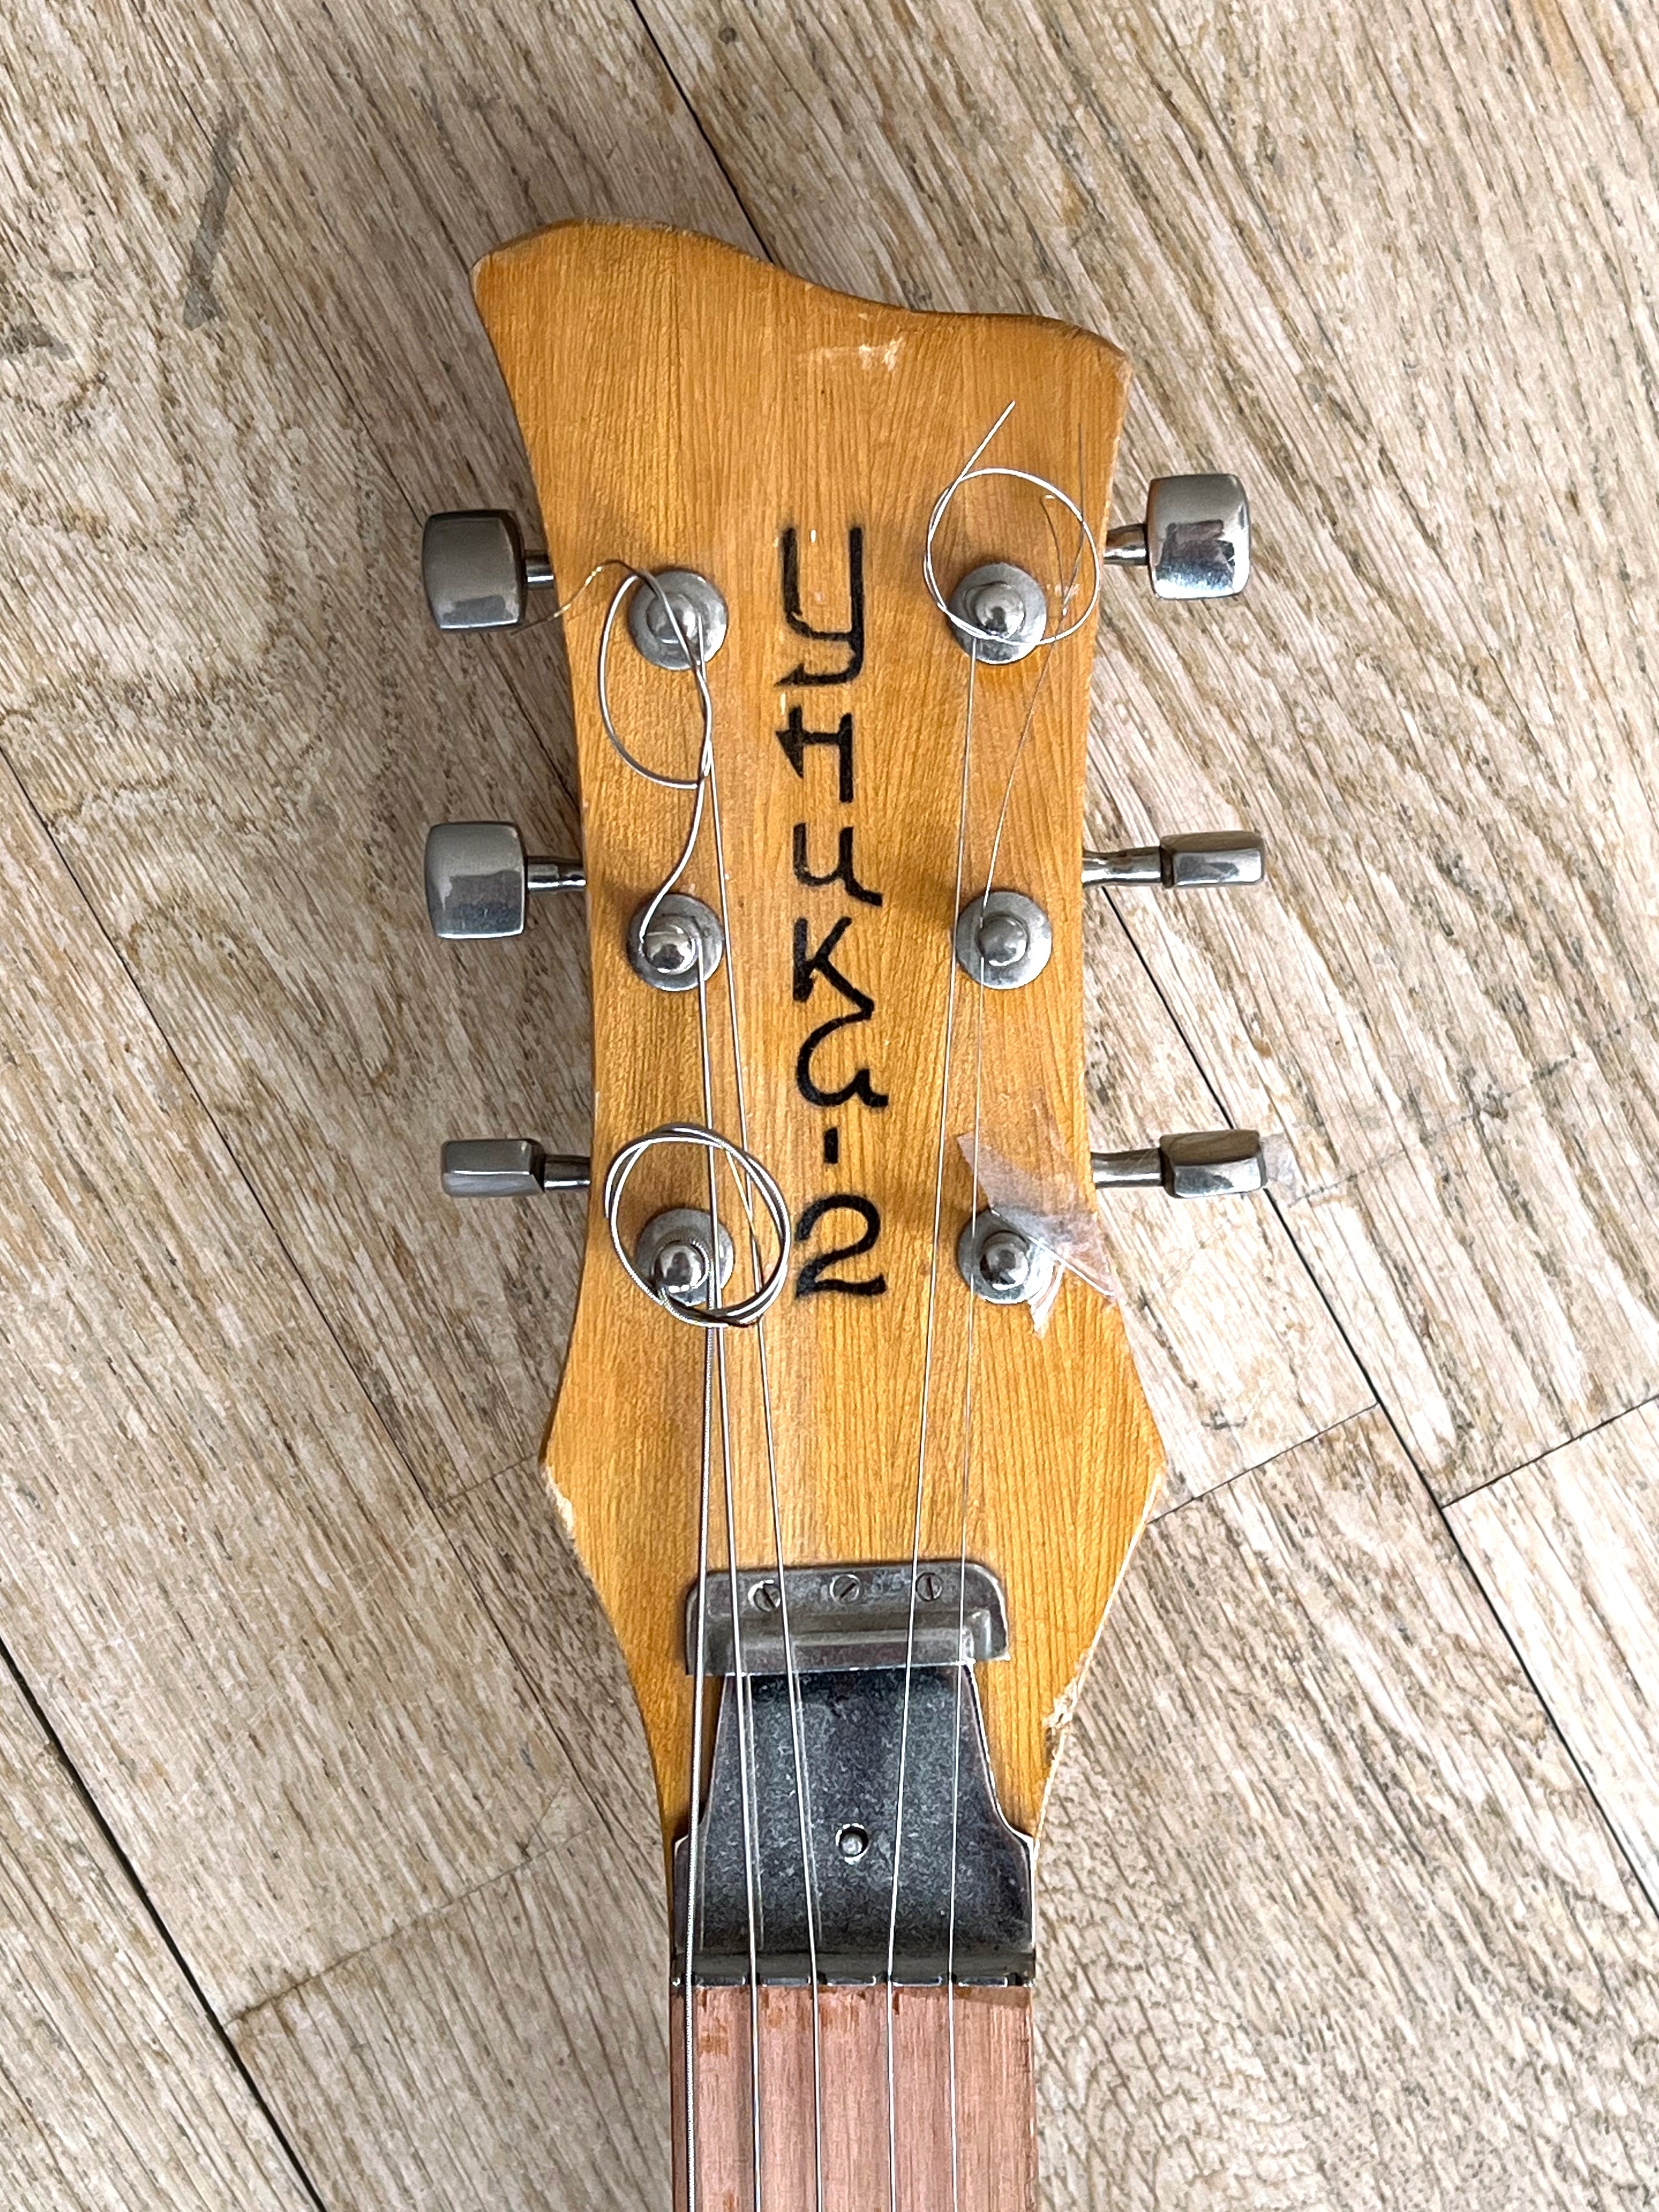 LOW-RES - The guitar that made "Makeup"